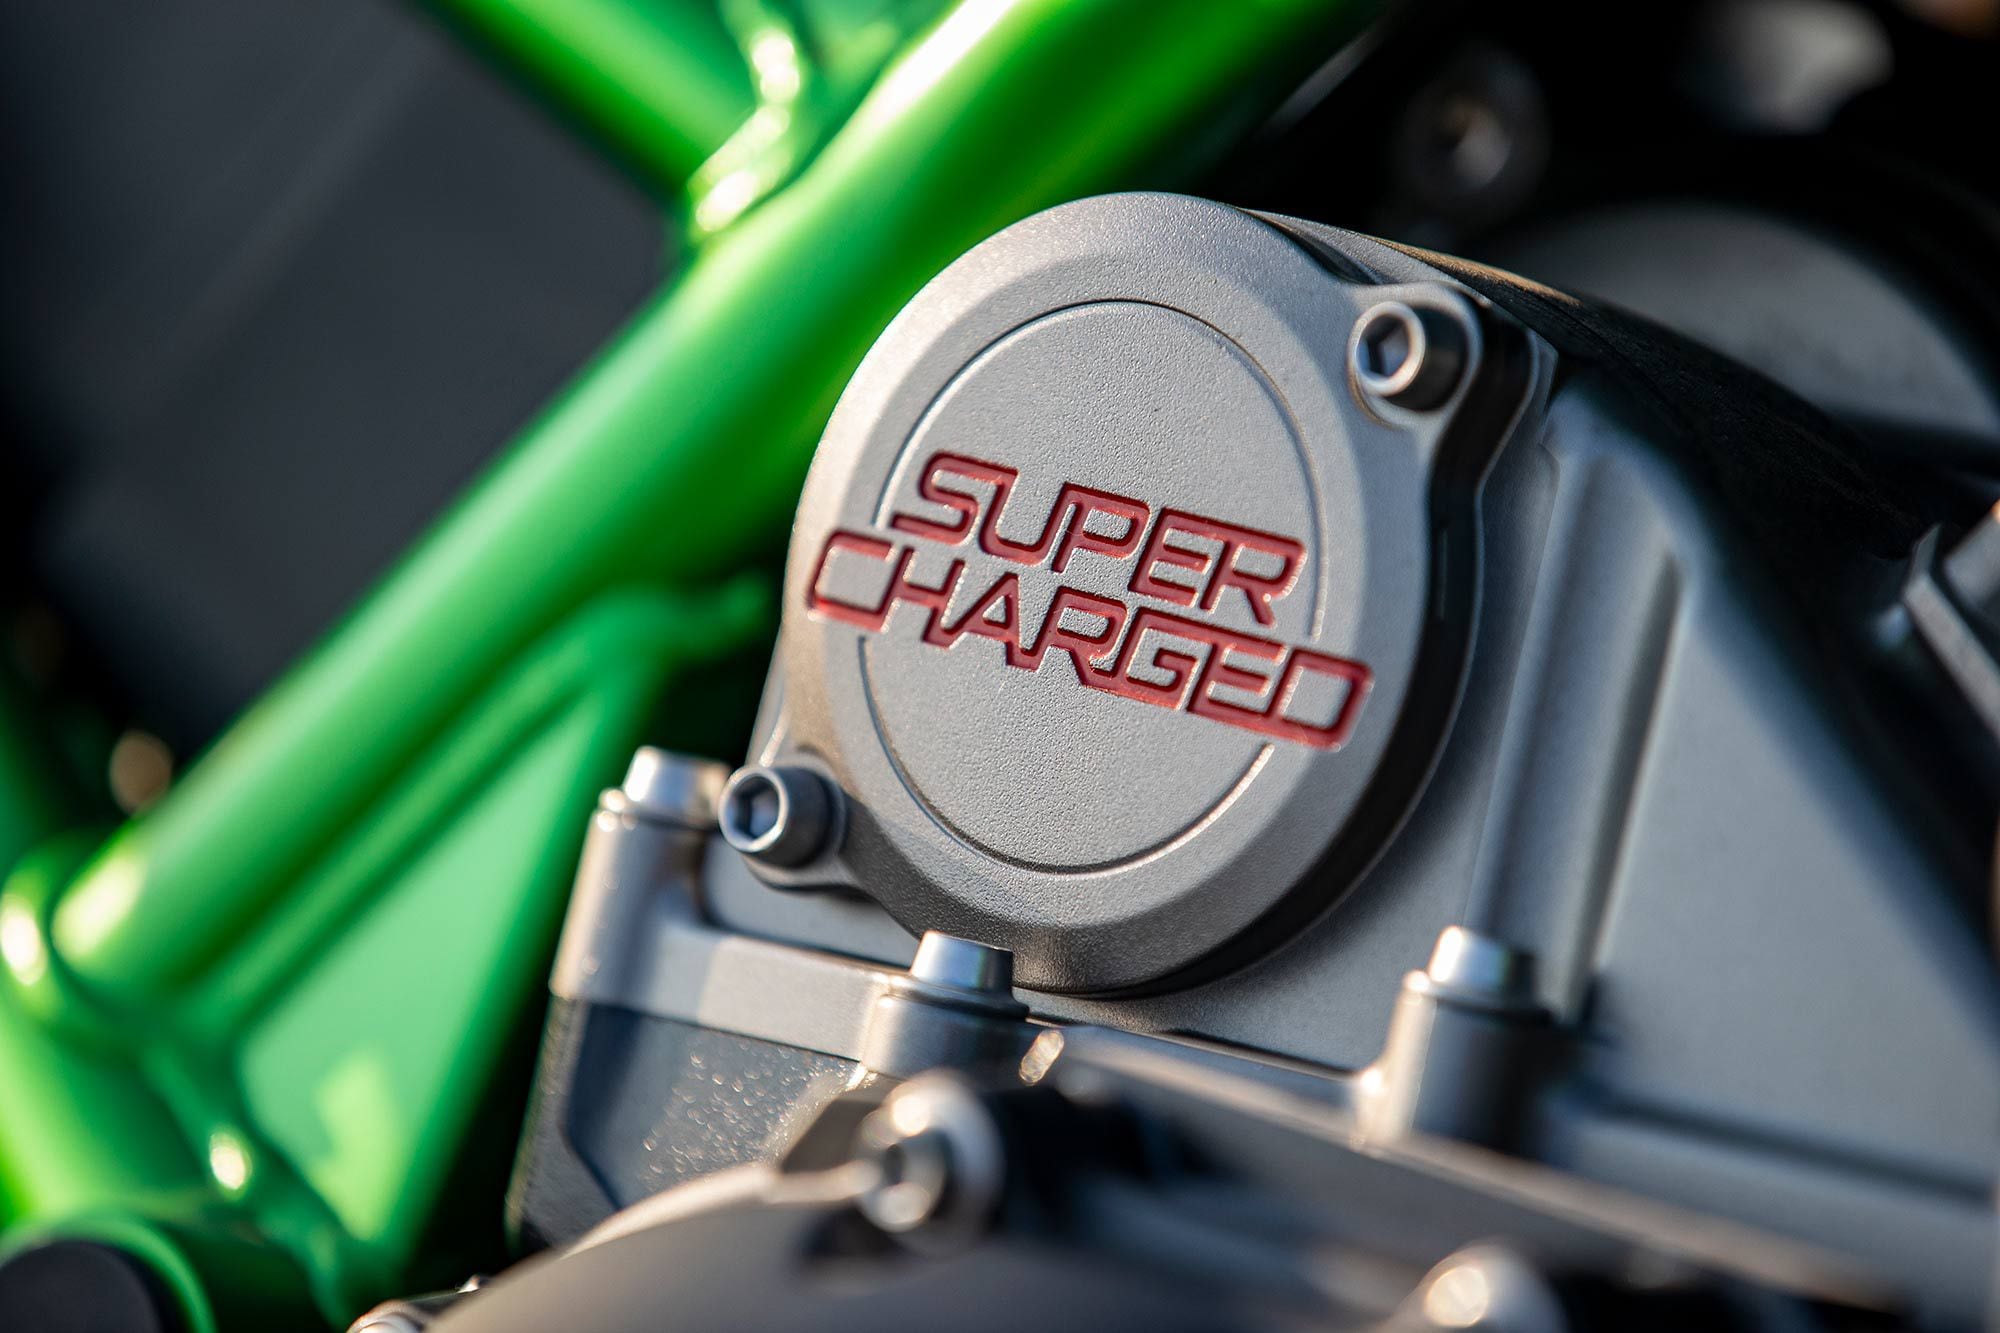 The supercharger on the Z H2 spins at 110,000 rpm at full boost.